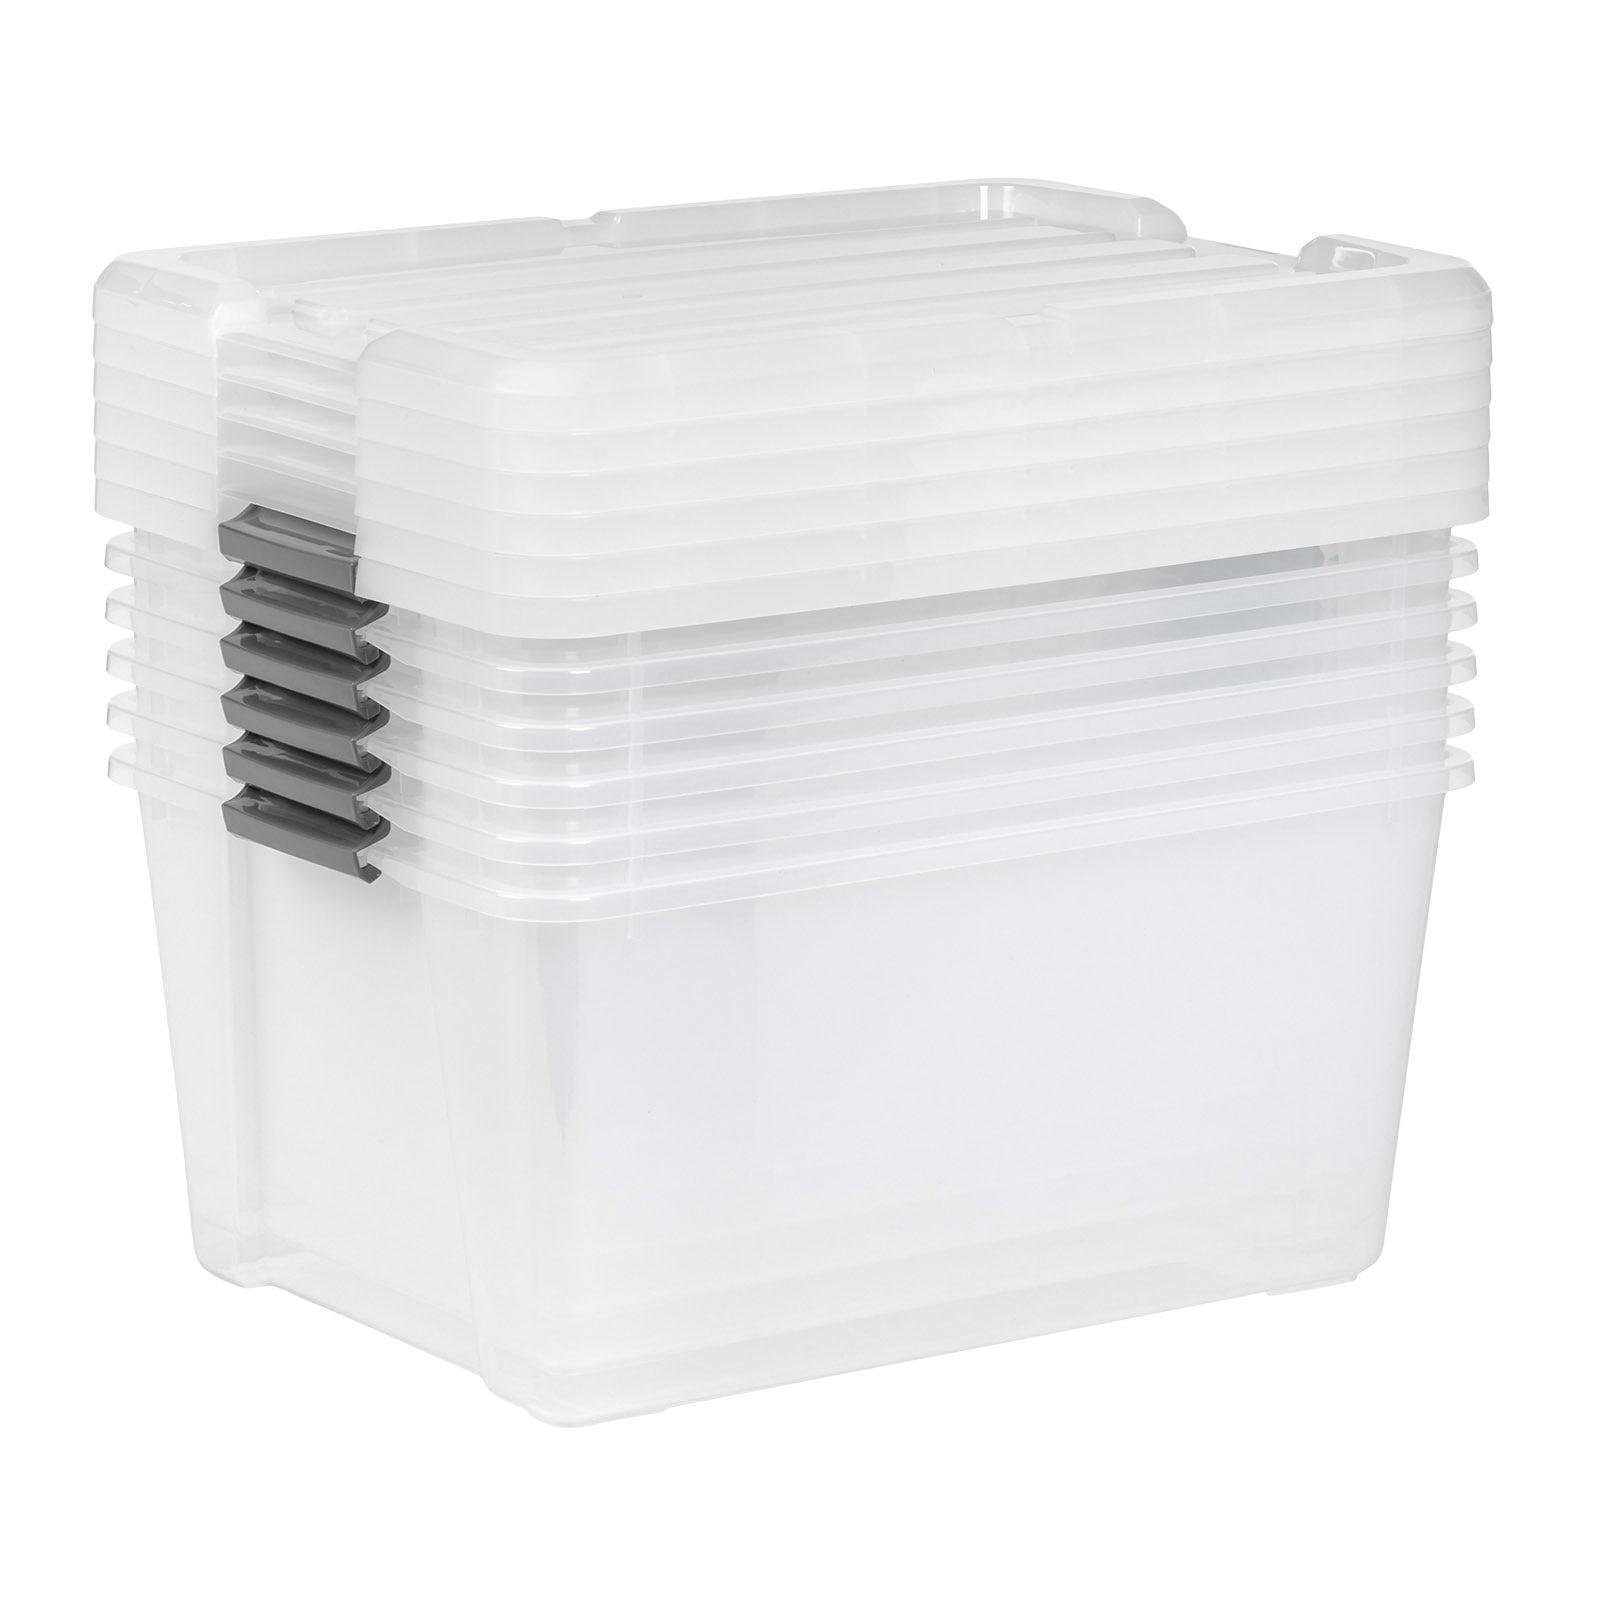 IRIS 45QT Clear Storage Bin with Buckles, 6-Pack